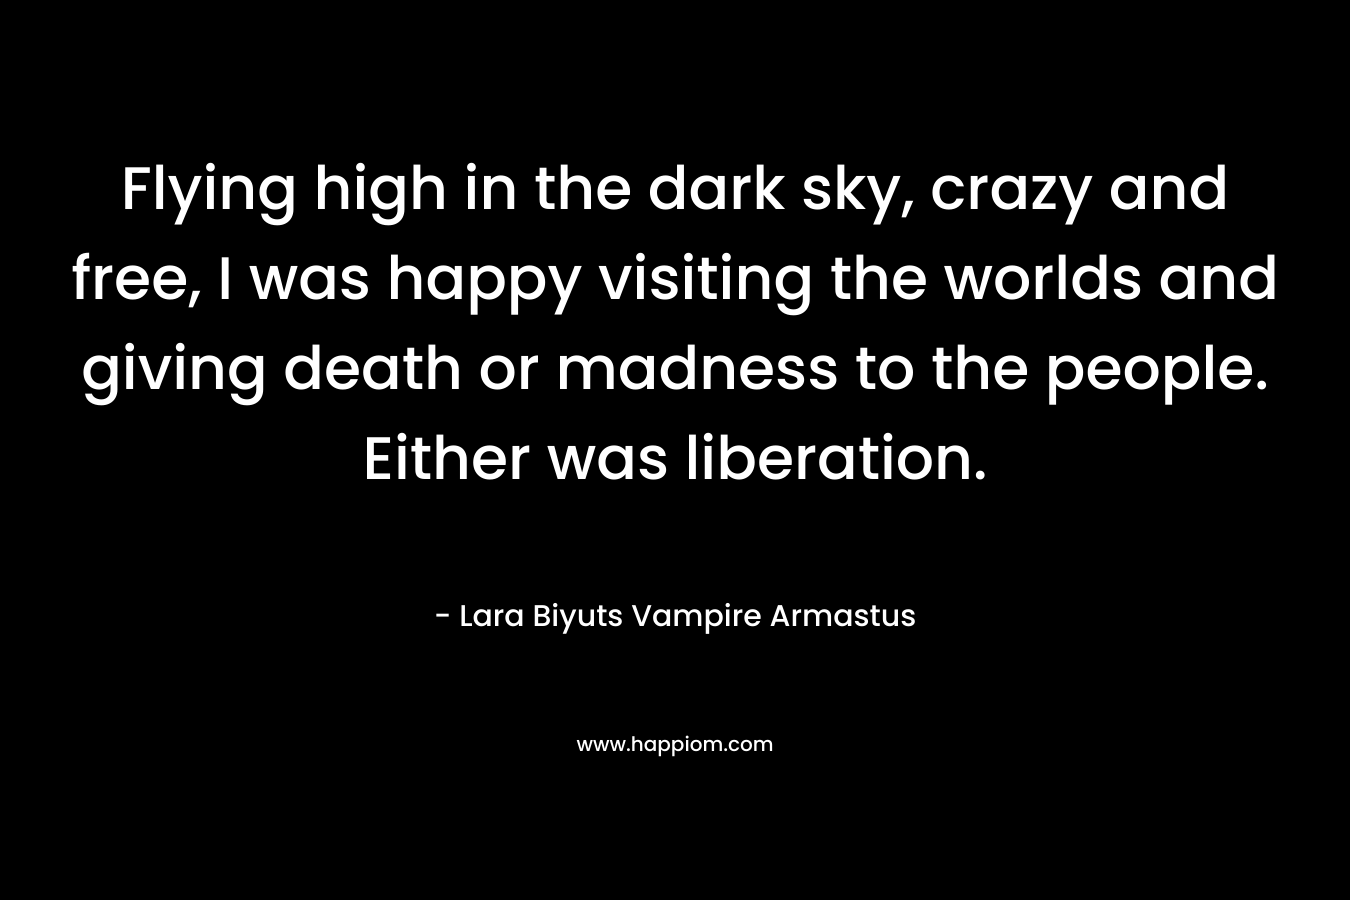 Flying high in the dark sky, crazy and free, I was happy visiting the worlds and giving death or madness to the people. Either was liberation.